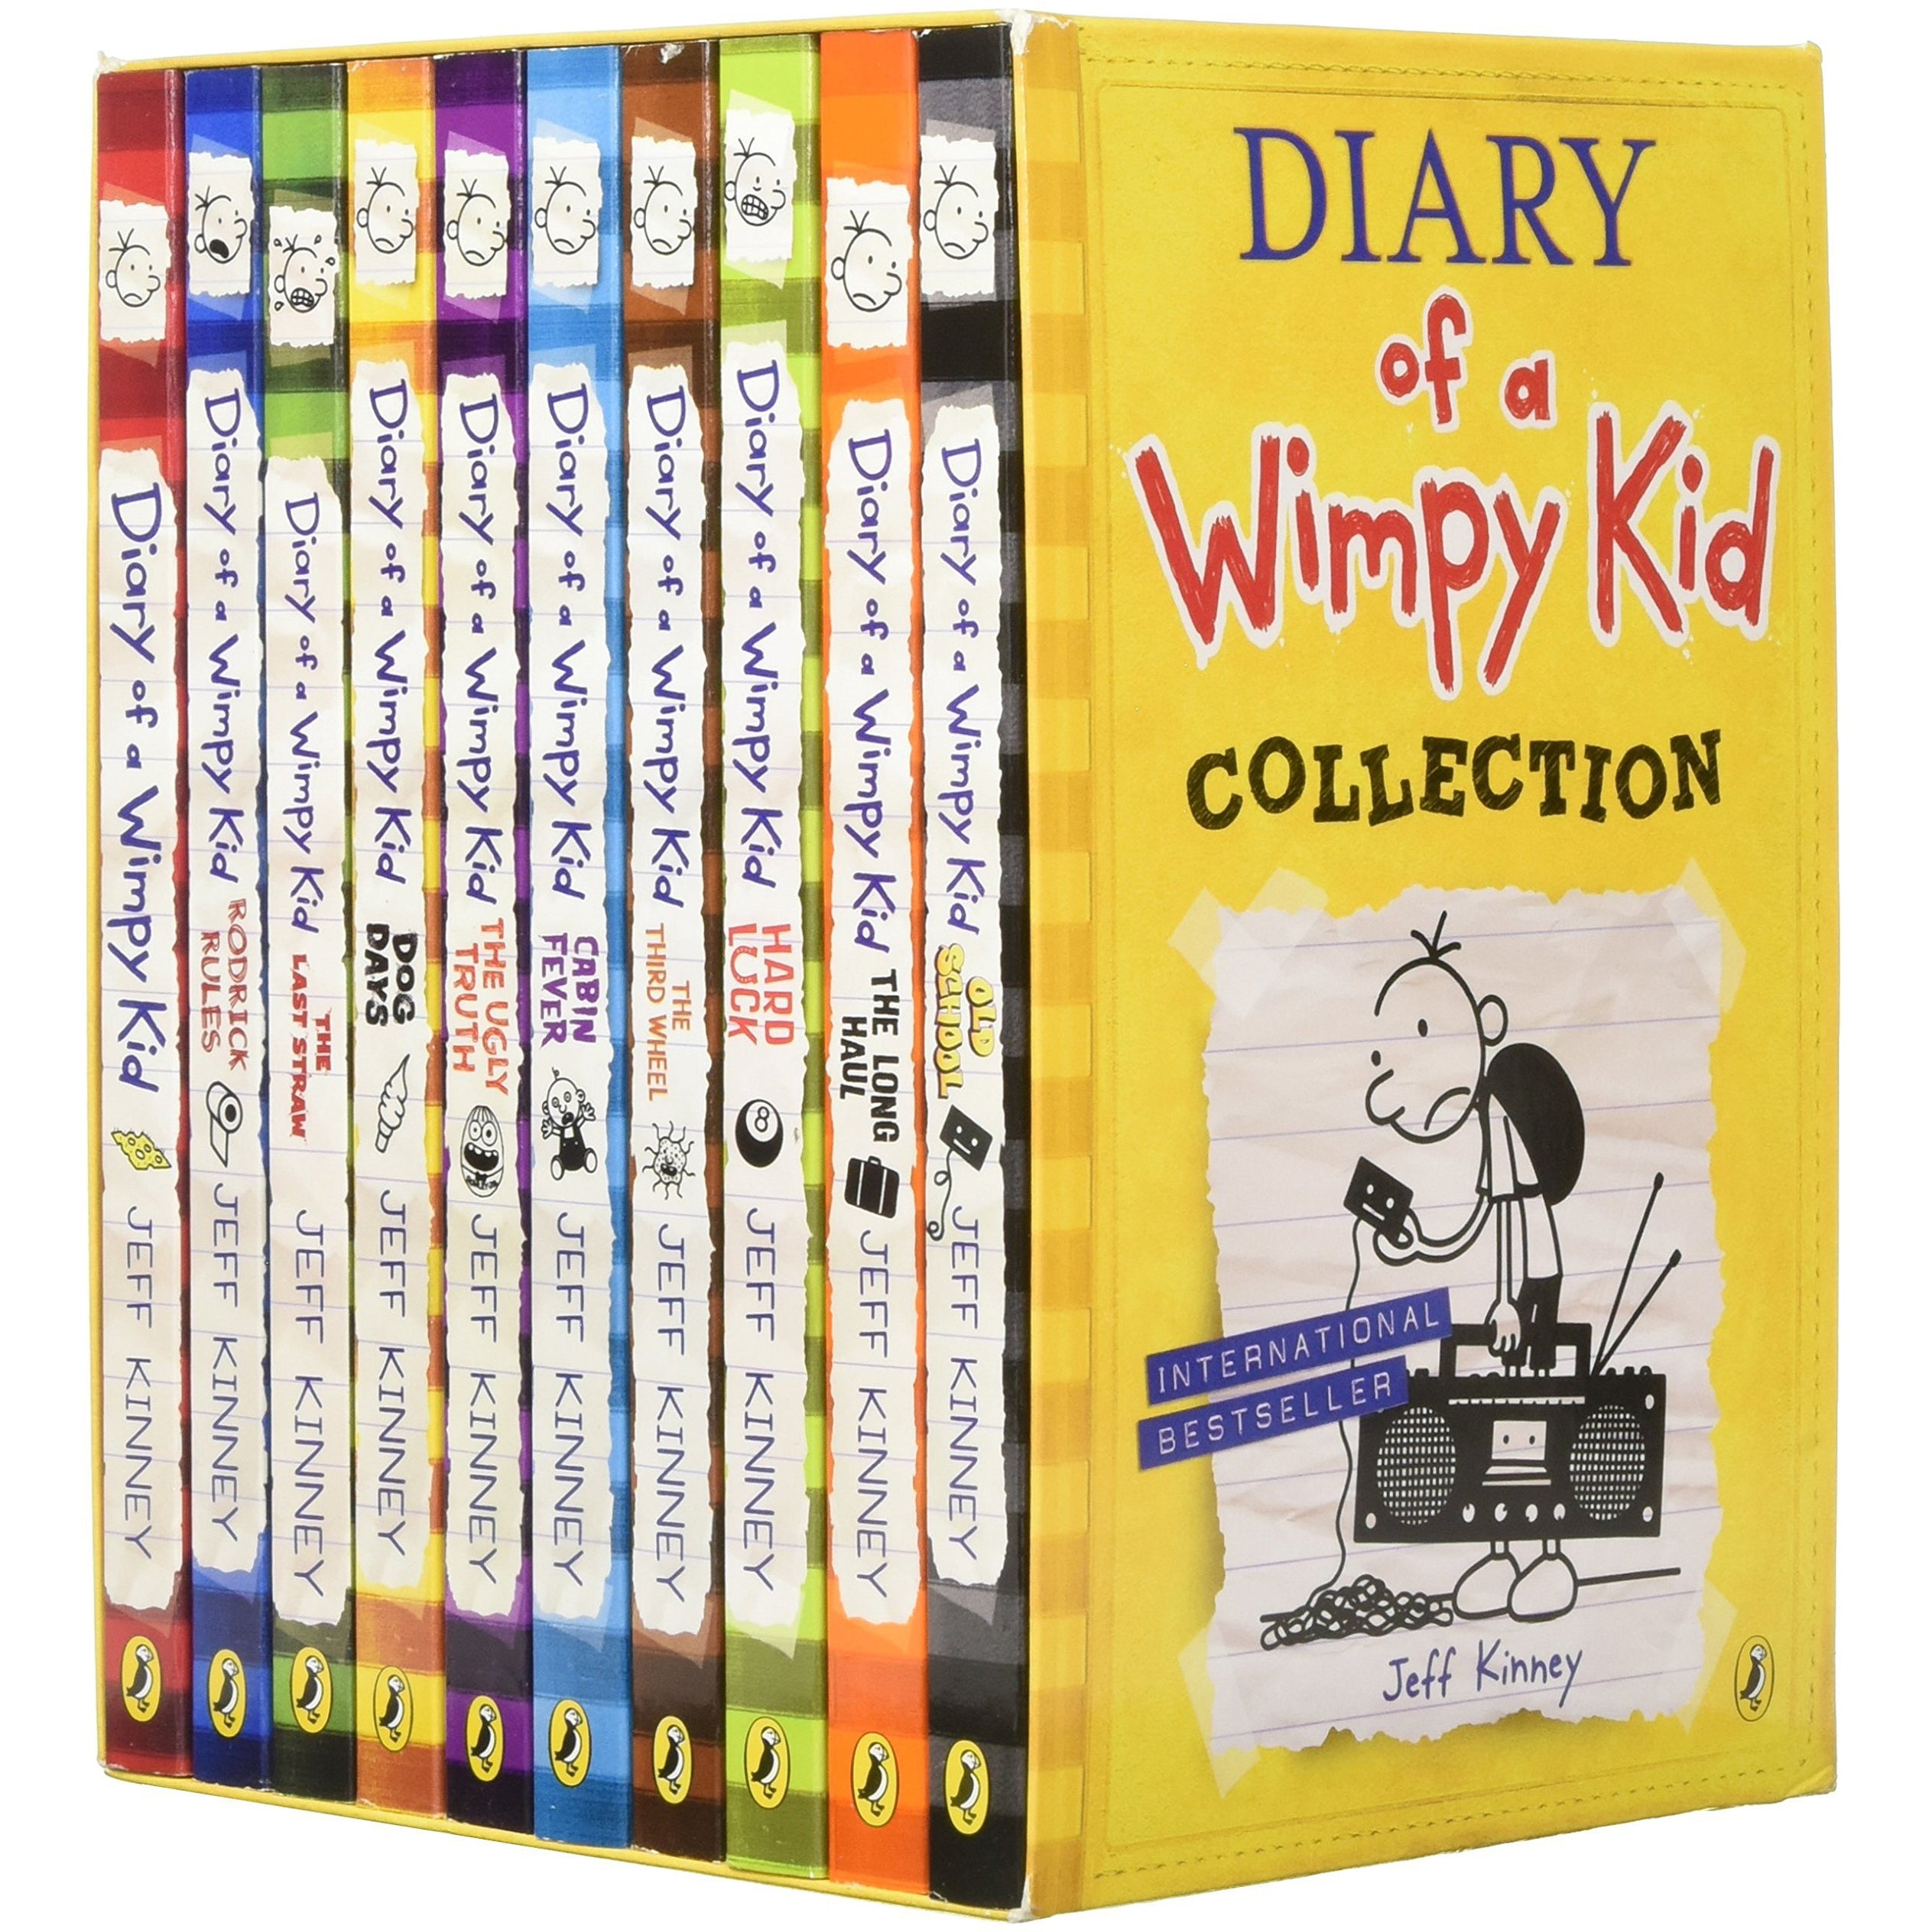 Diary of a Wimpy Kid Box Set Collection (10 Books) (Diary of a Wimpy